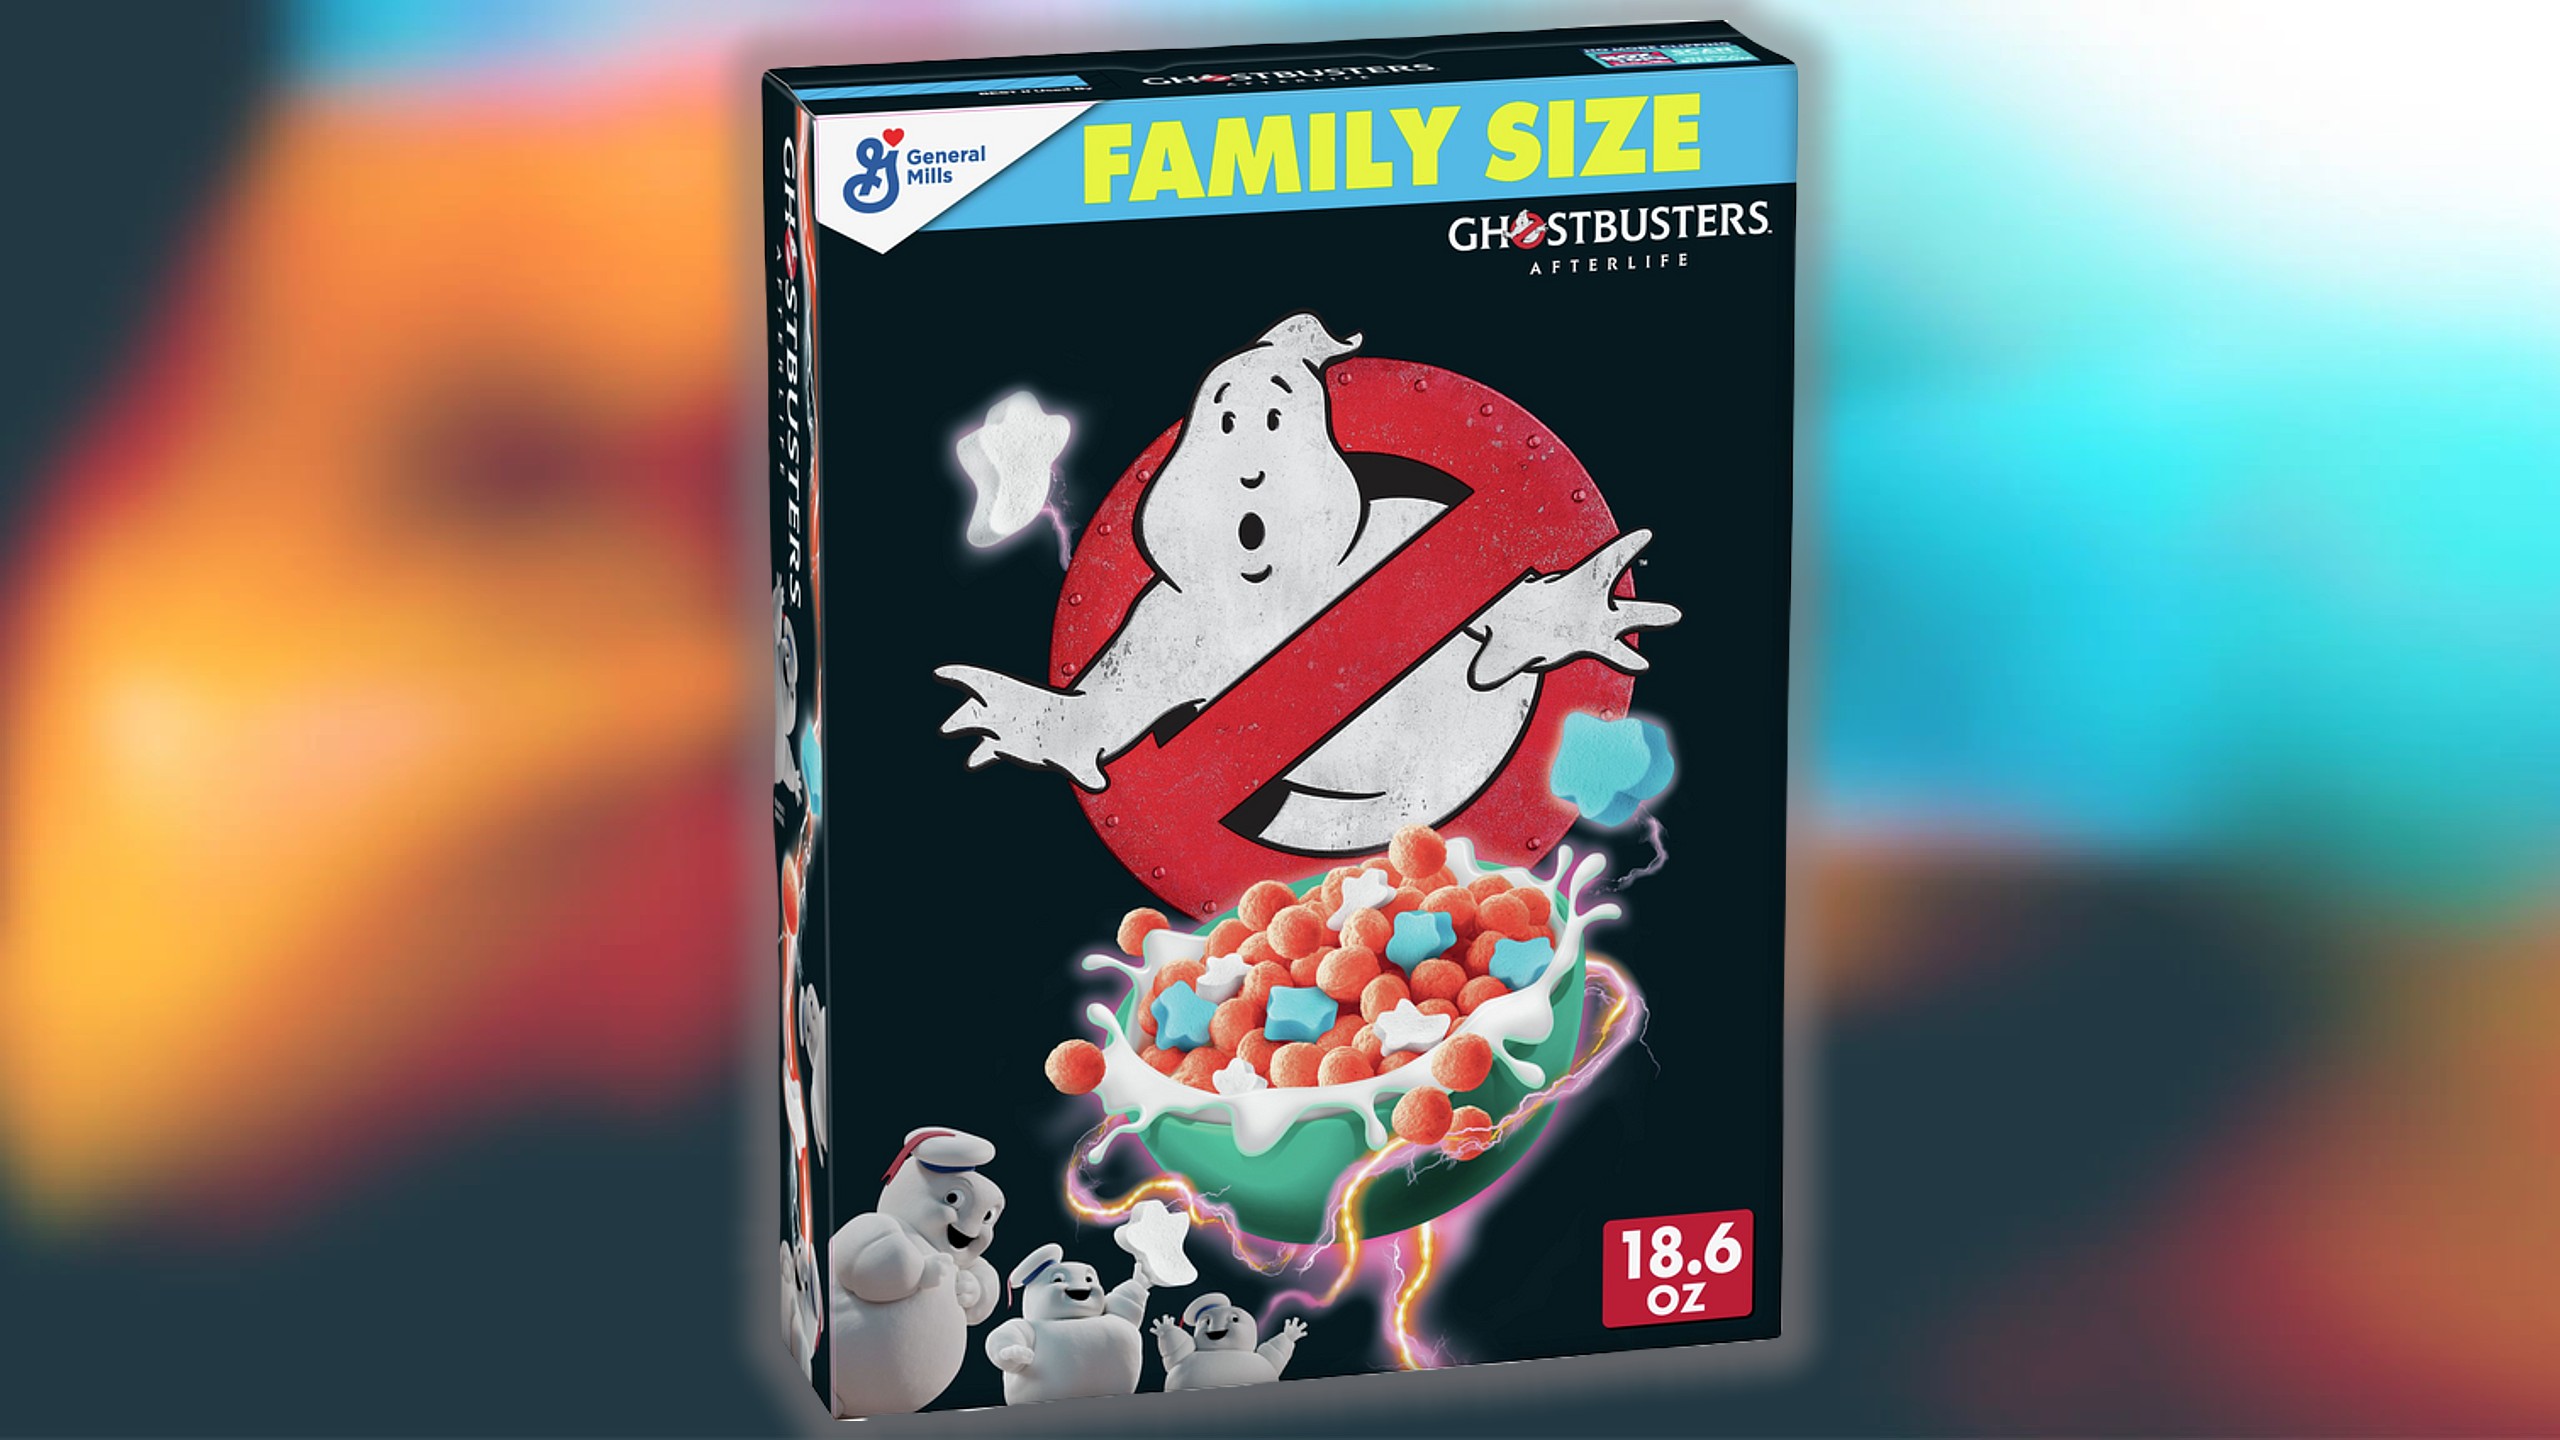 Ghostbusters: Afterlife cereal